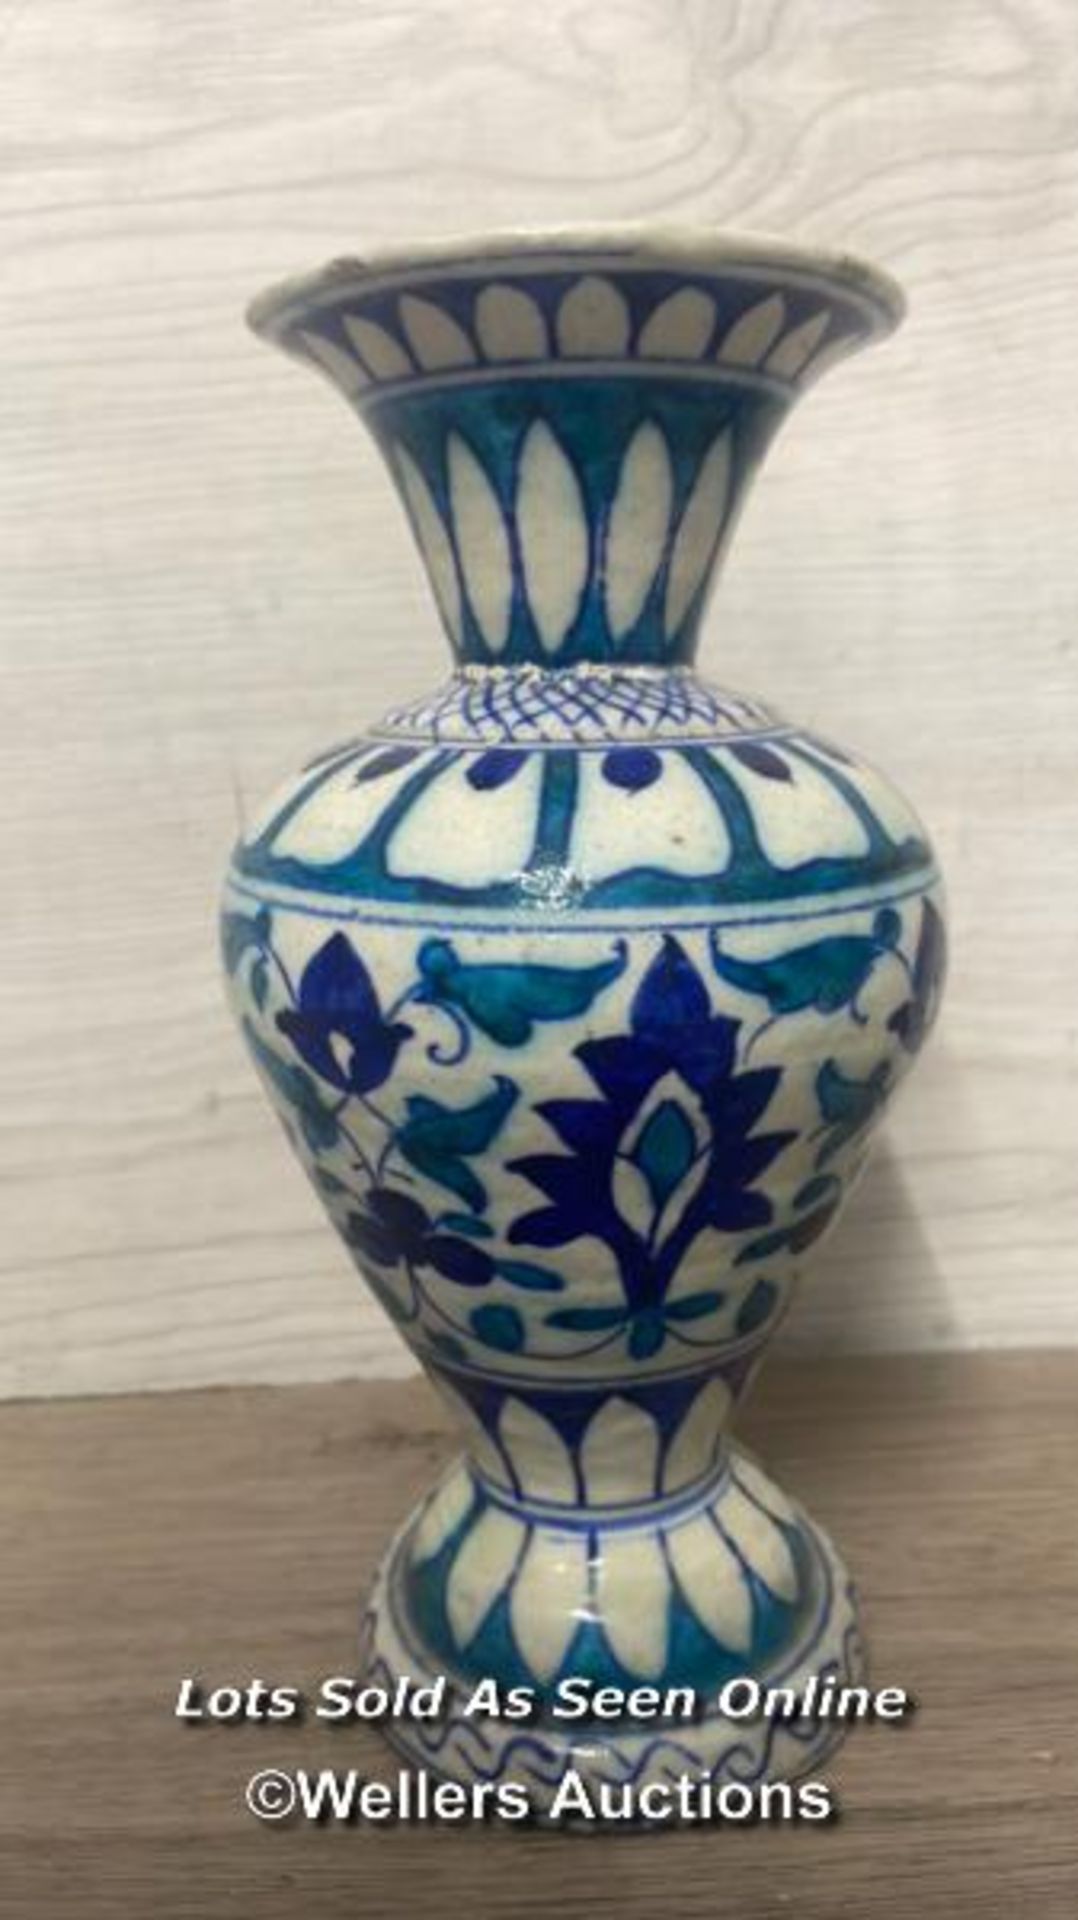 TWO SIMILAR MULTAN POTTERY VASES FROM PAKISTAN, HAND PAINTED BLUE & TURQUOISE FOLIAGE AND FLOWER - Bild 2 aus 15